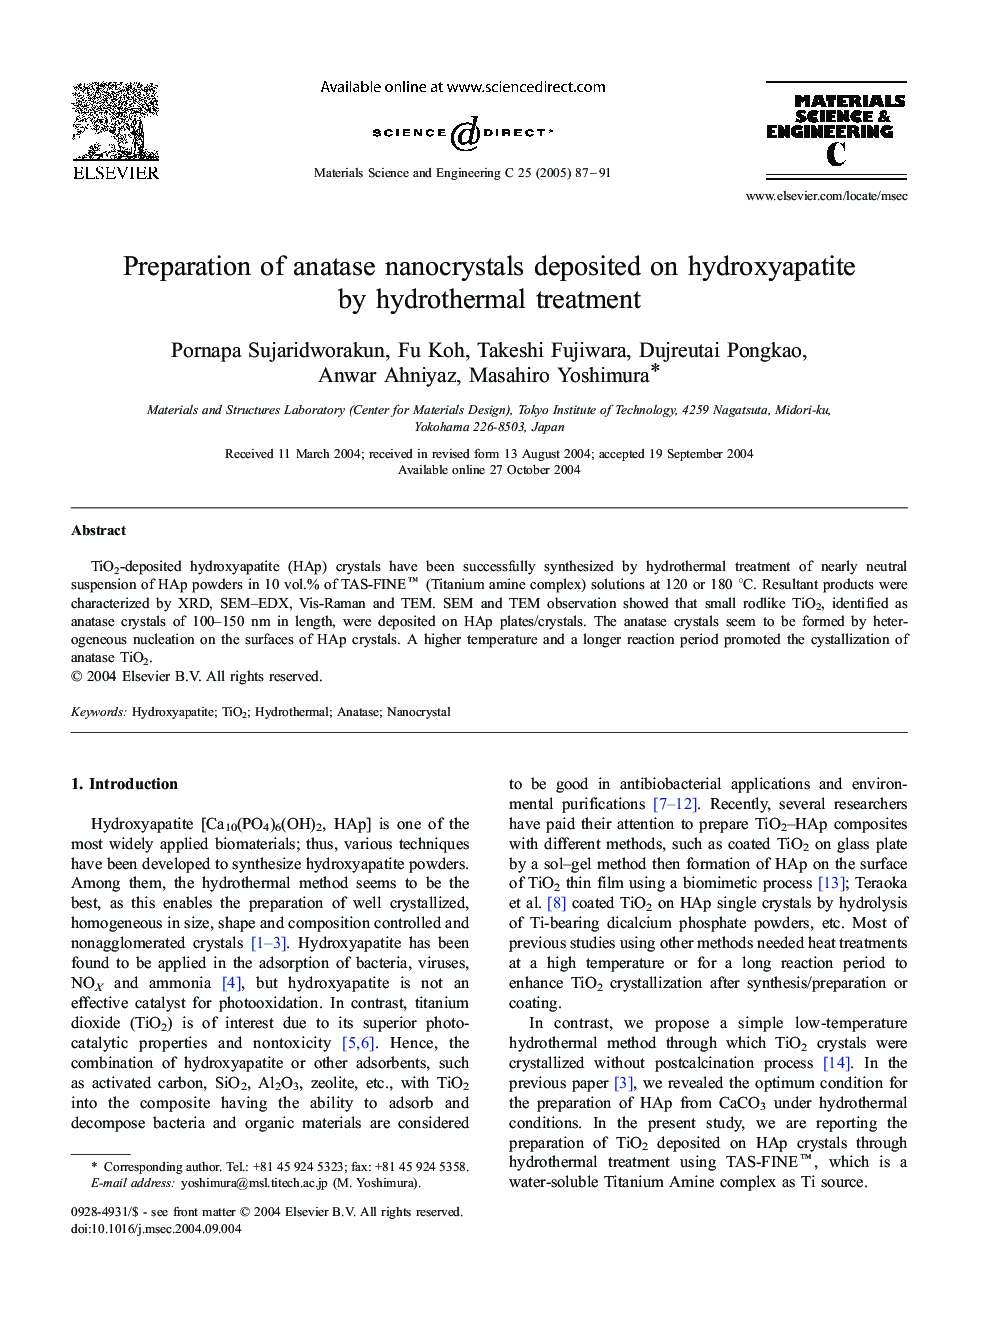 Preparation of anatase nanocrystals deposited on hydroxyapatite by hydrothermal treatment